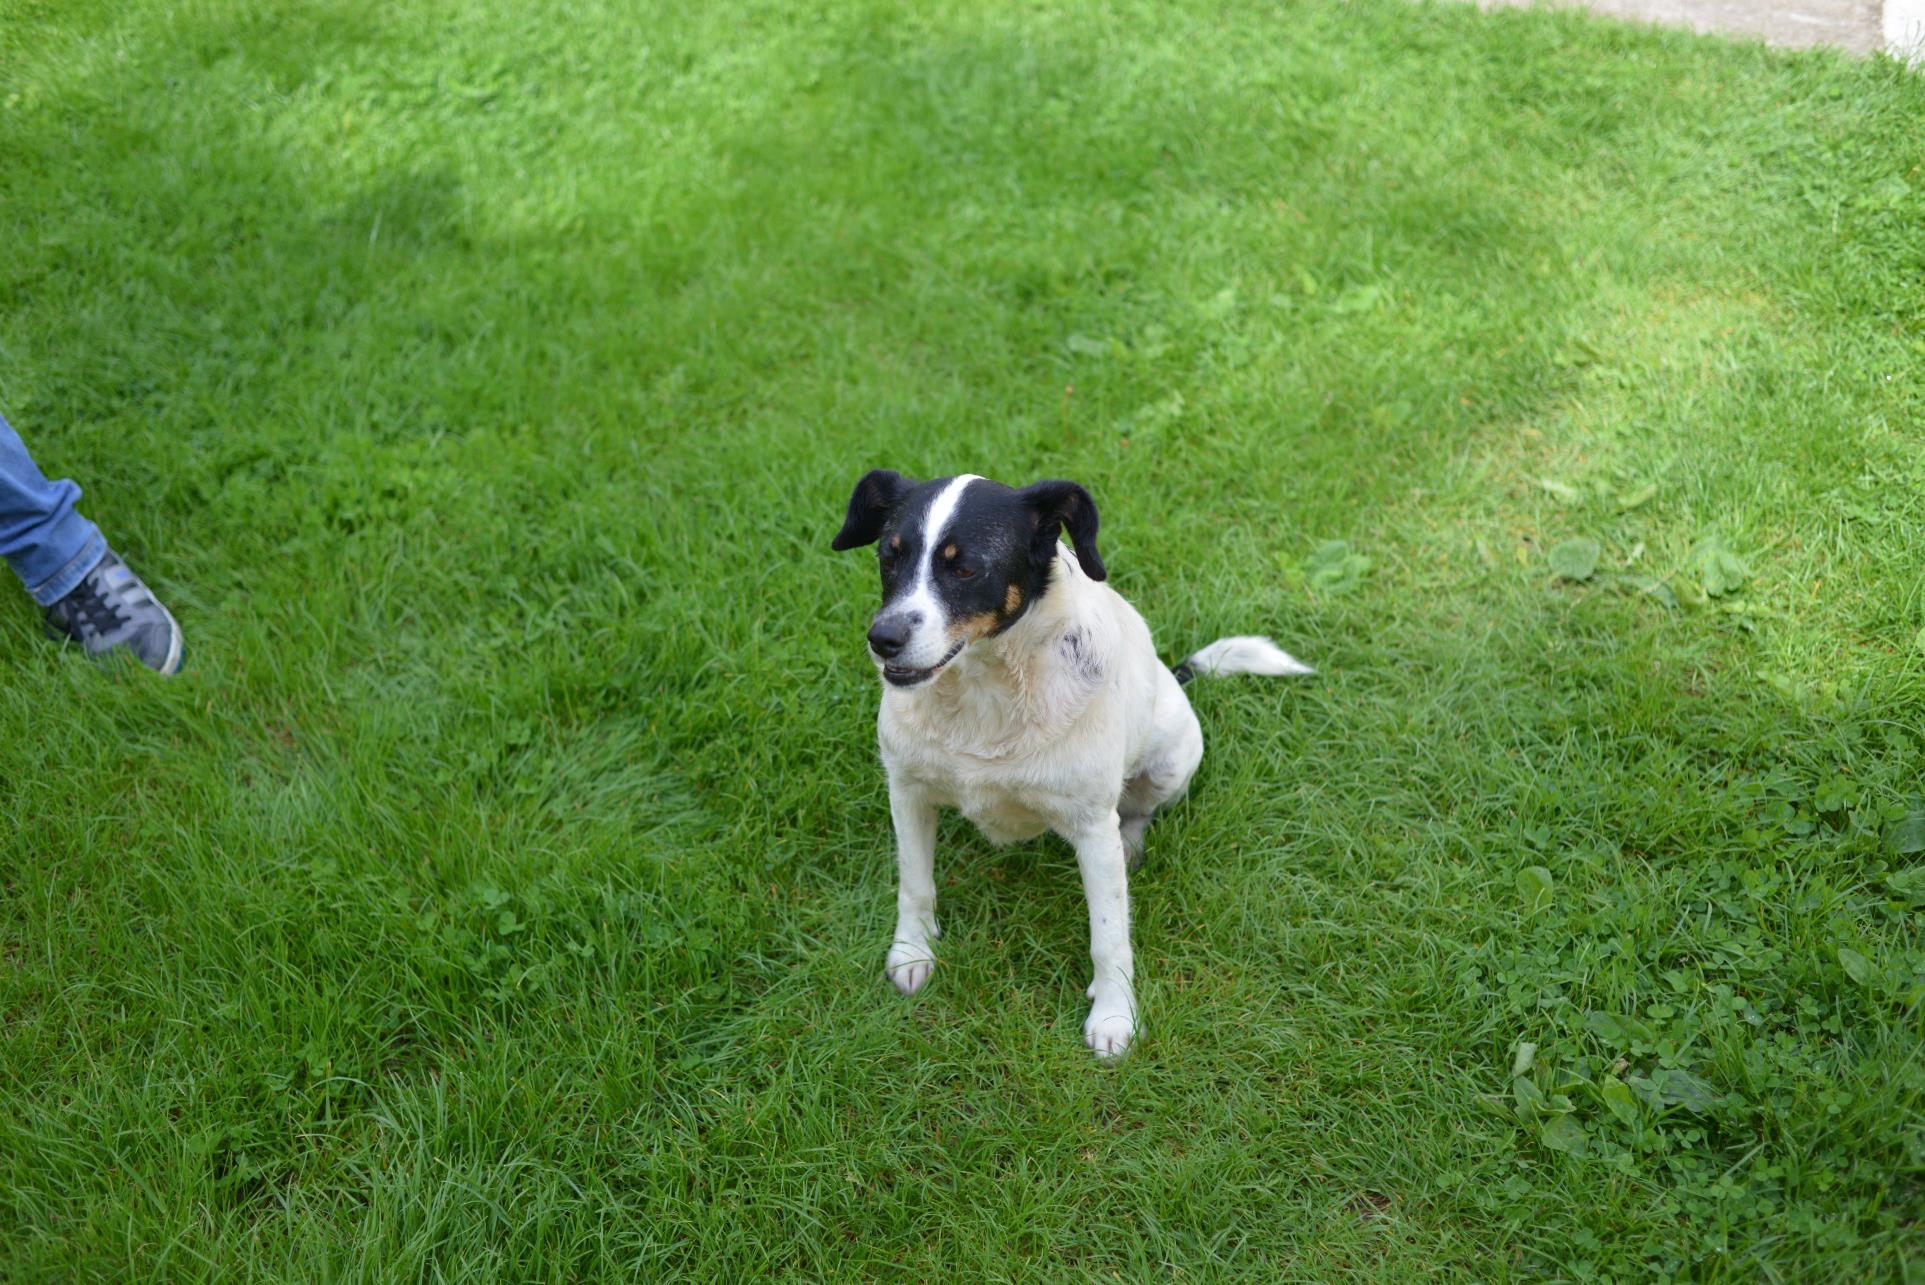 A small white dog standing in the grass

Description automatically generated